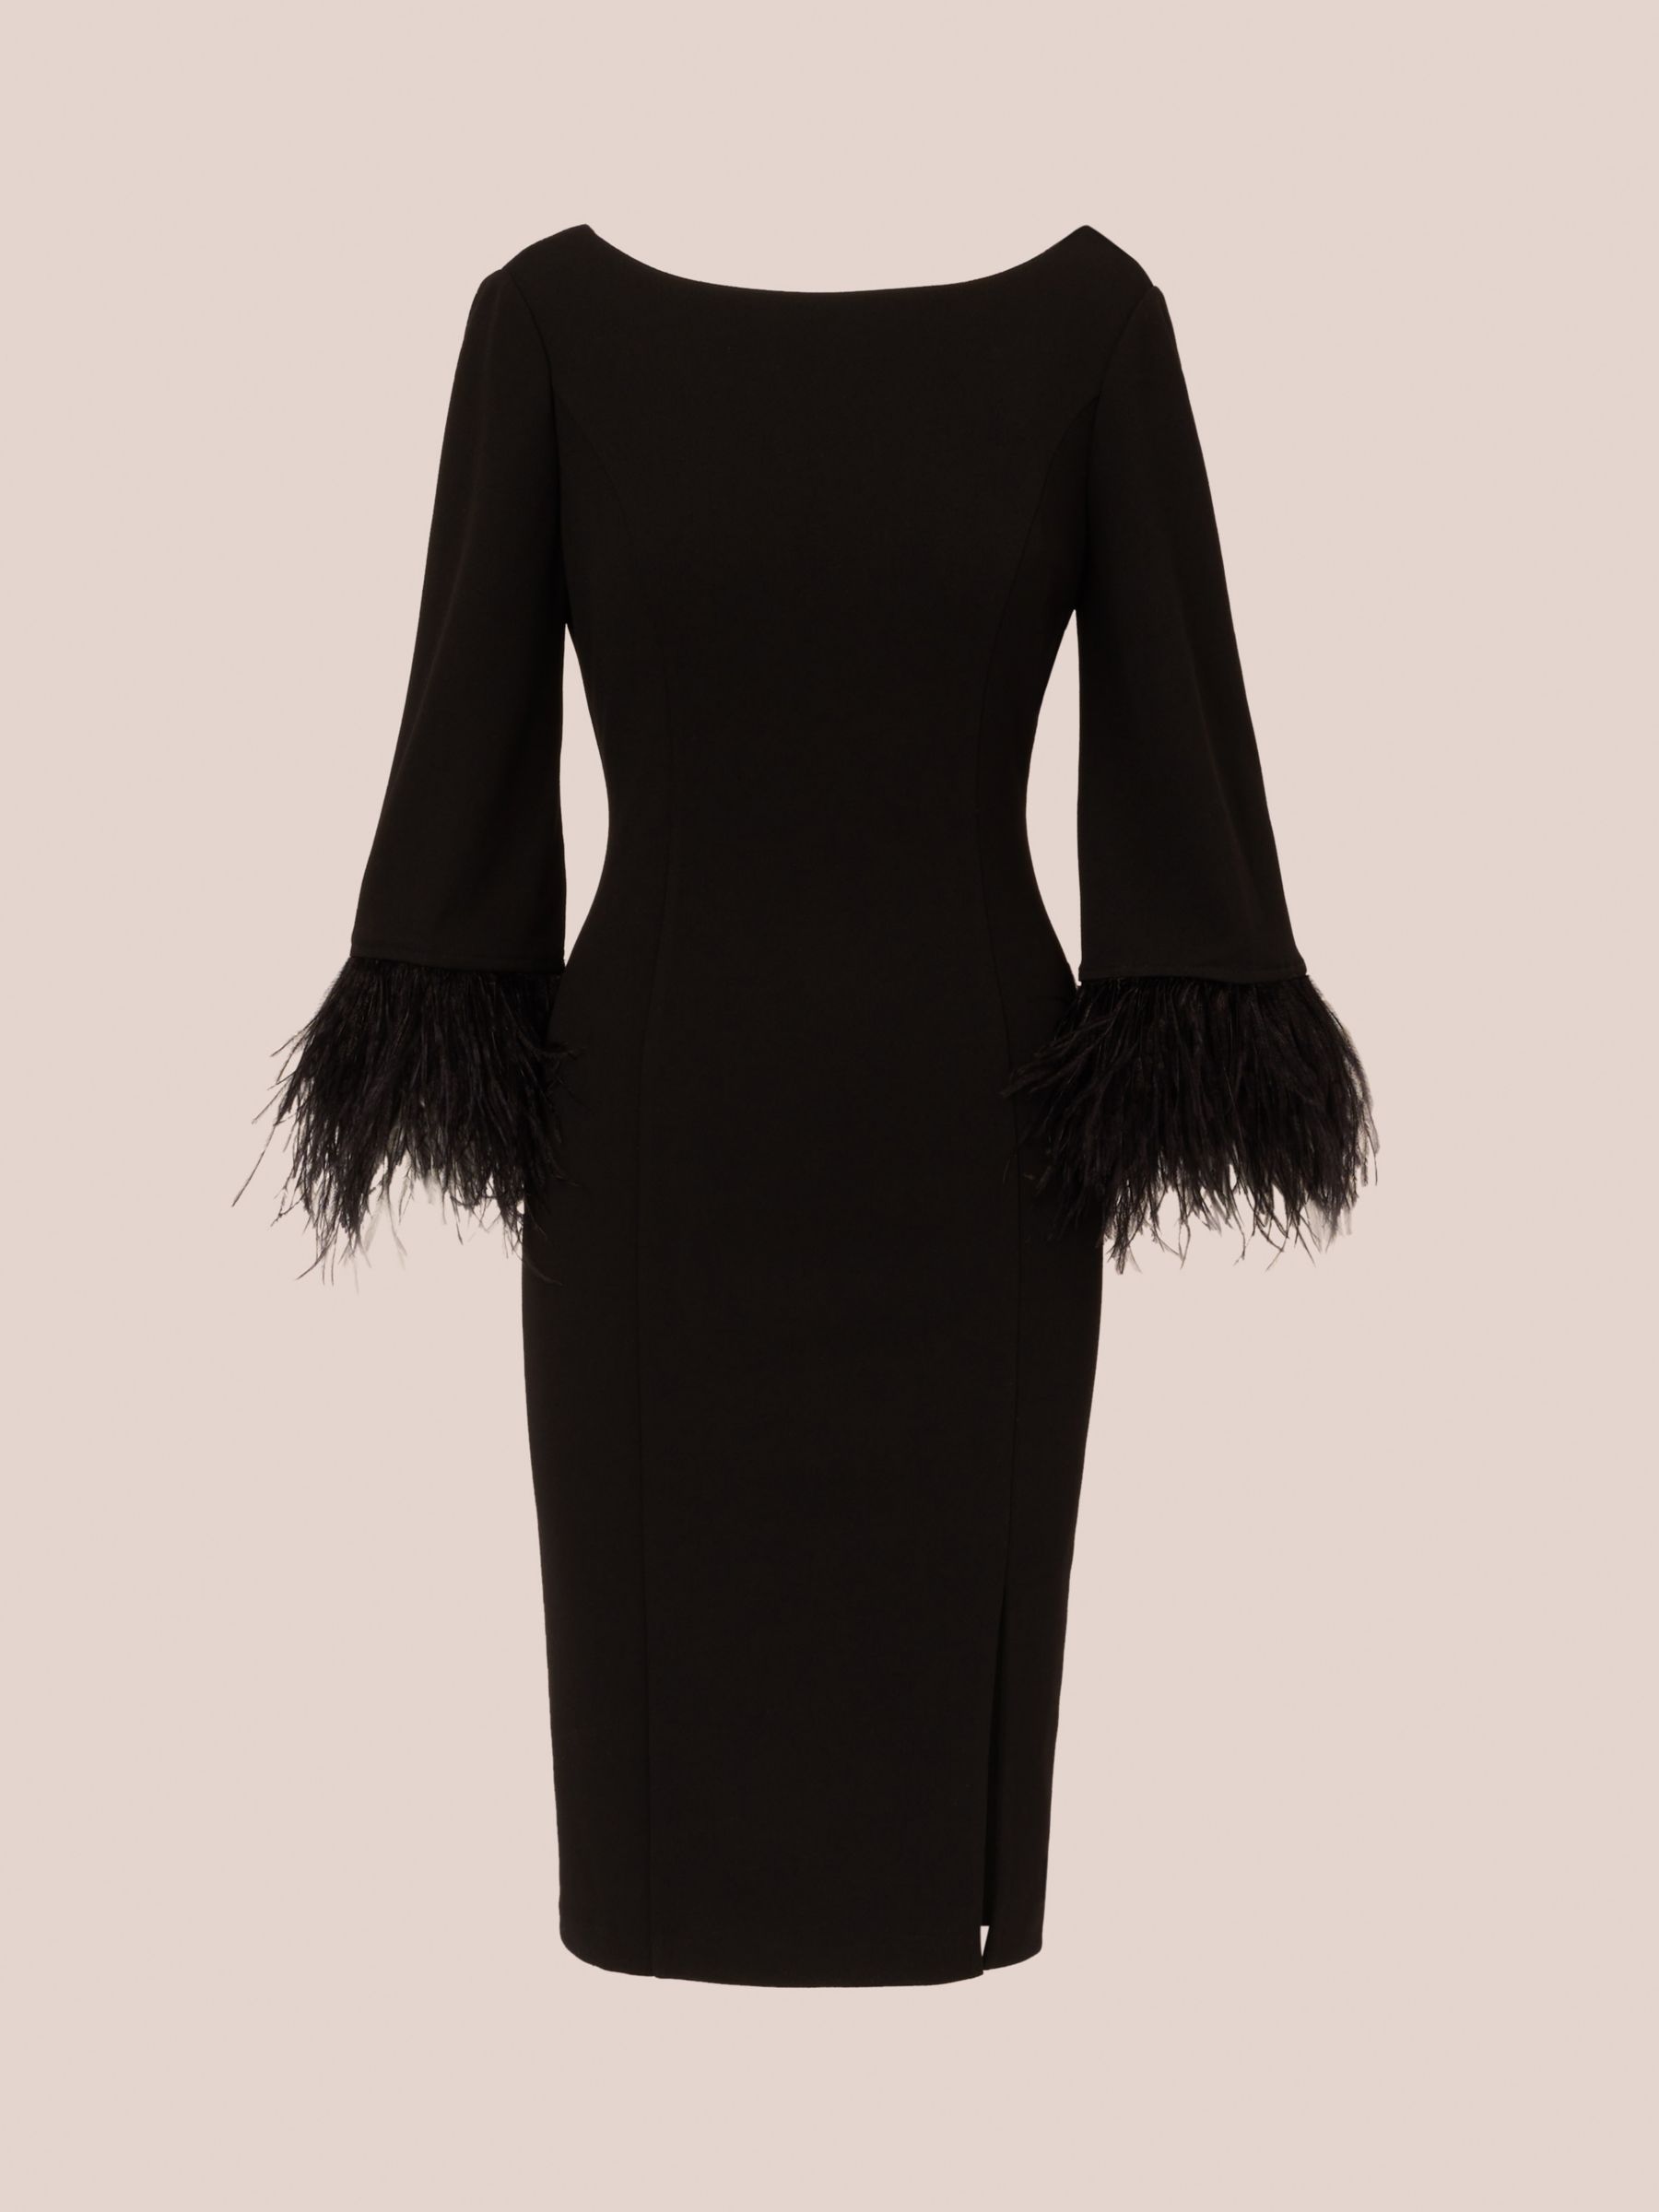 Adrianna Papell Feather Trimmed Sheath Dress, Black at John Lewis ...